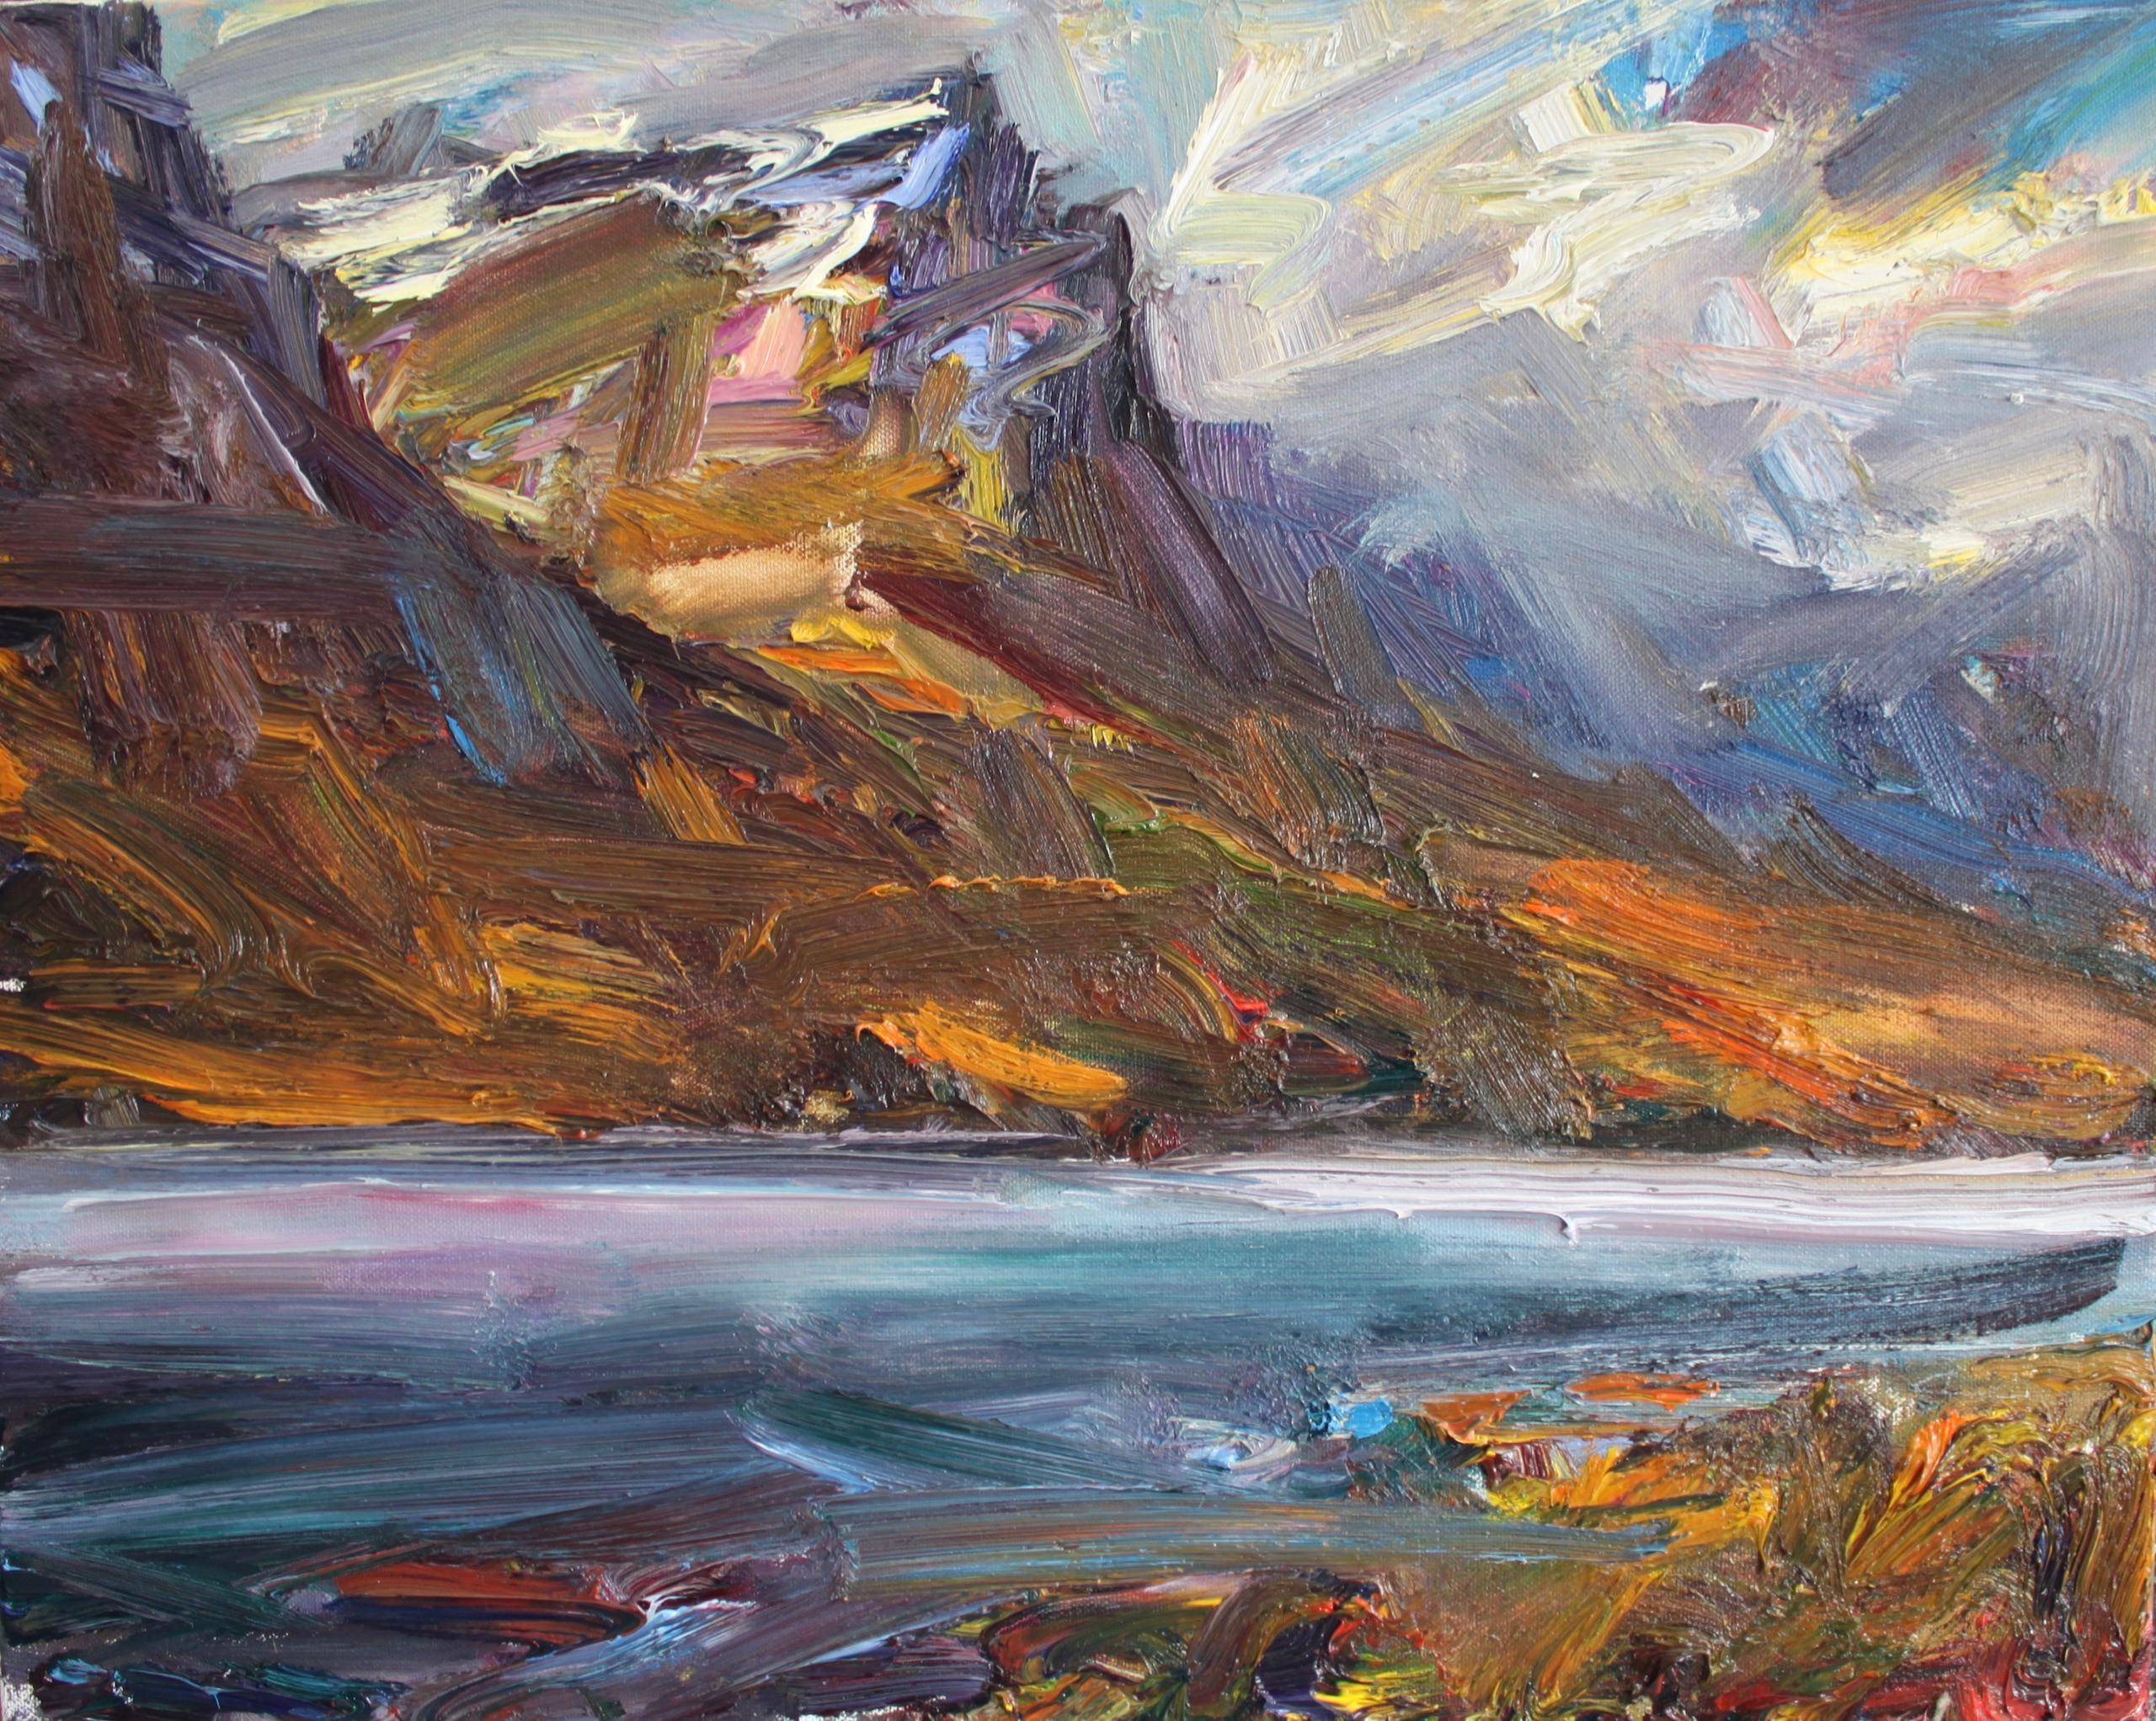 Loch nan Arr is a unique oil on board painting by contemporary artist Jonathan Shearer, dimensions are 41 × 51 × 3.5 cm (16.1 × 20.1 × 1.4 in).
The artwork is signed, sold unframed and comes with a certificate of authenticity.

Jonathan Shearer's